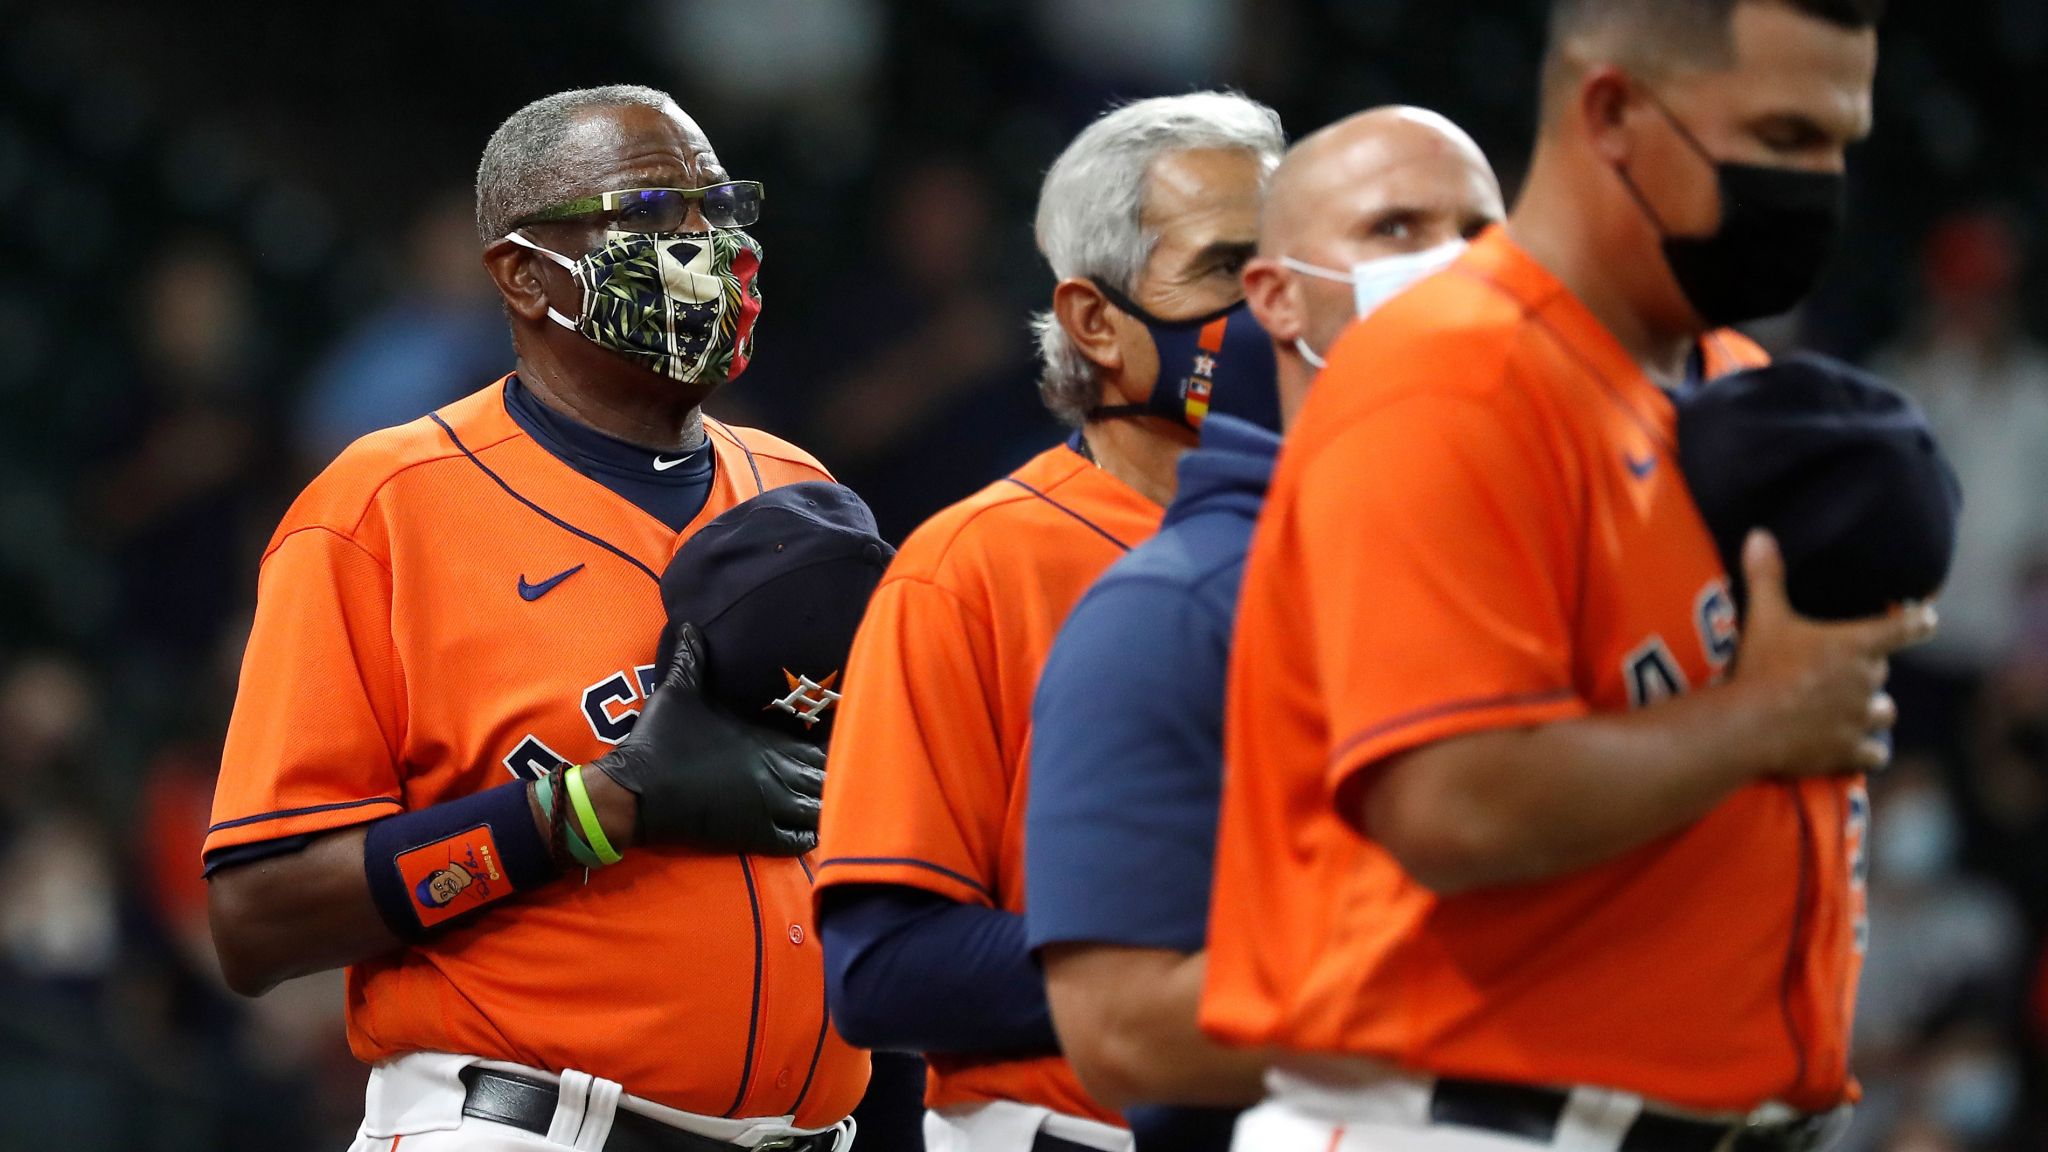 On deck: Seattle Mariners at Astros